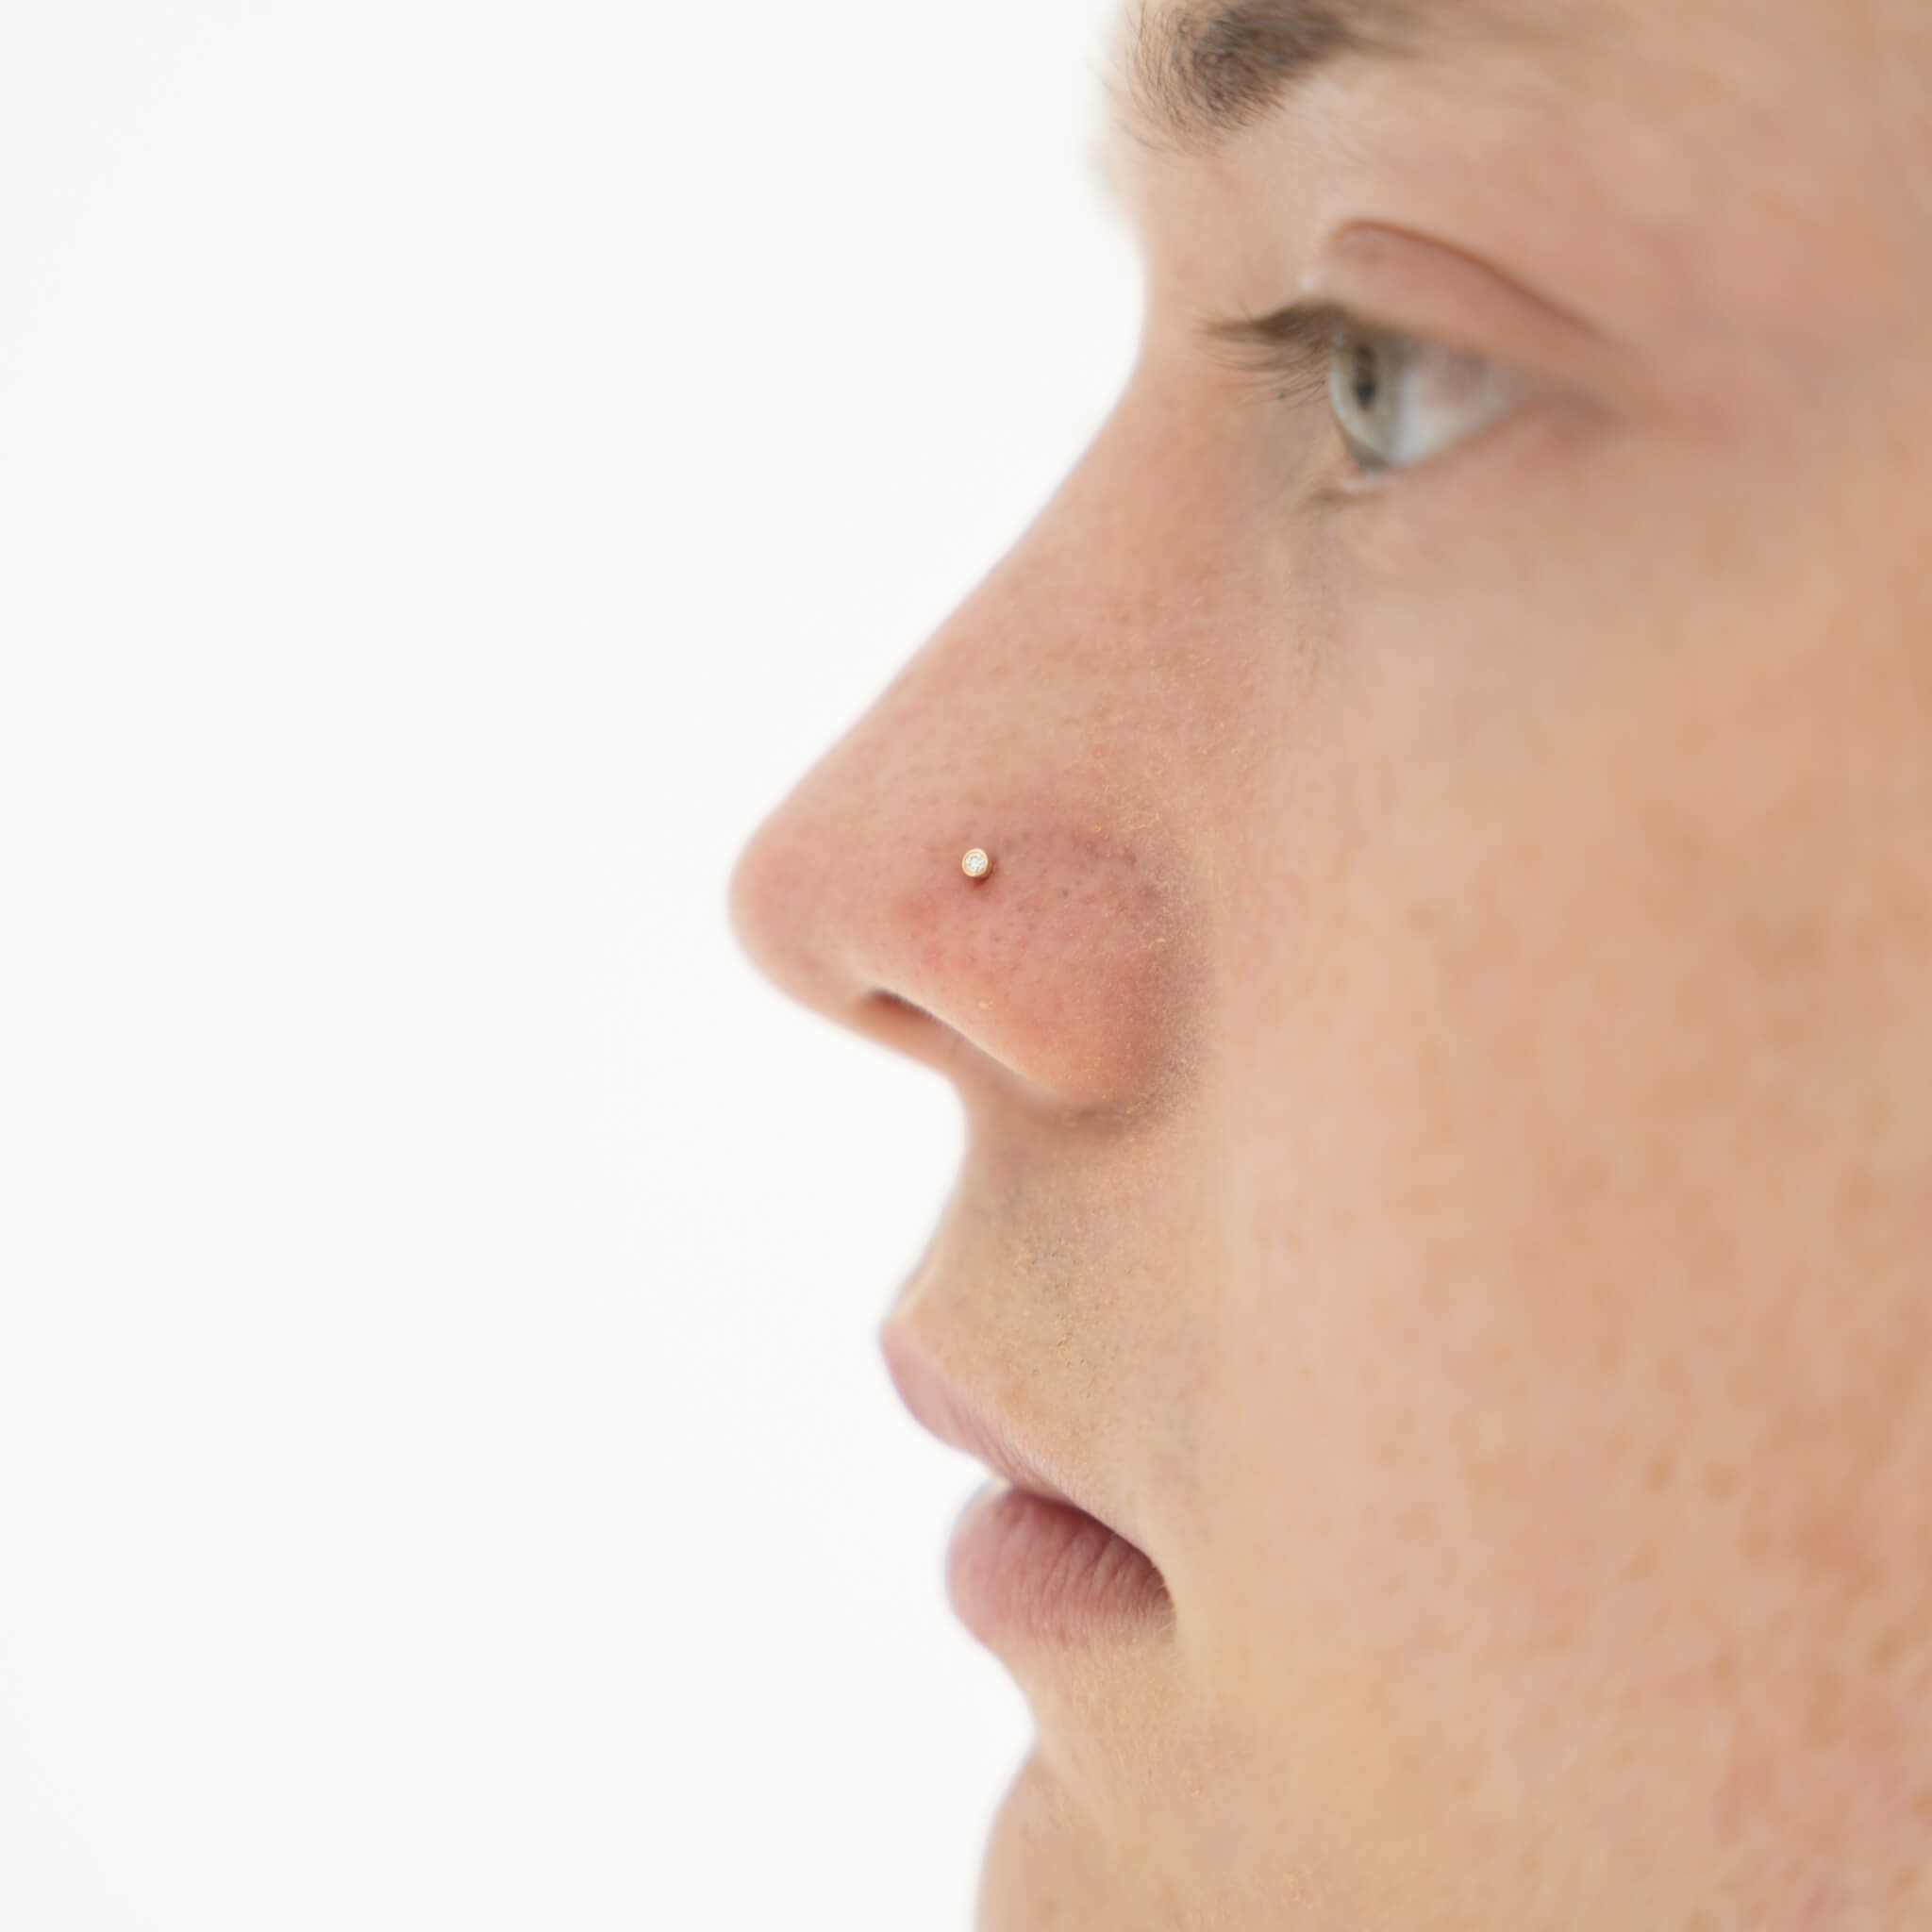 what does a nose piercing look like without the stud